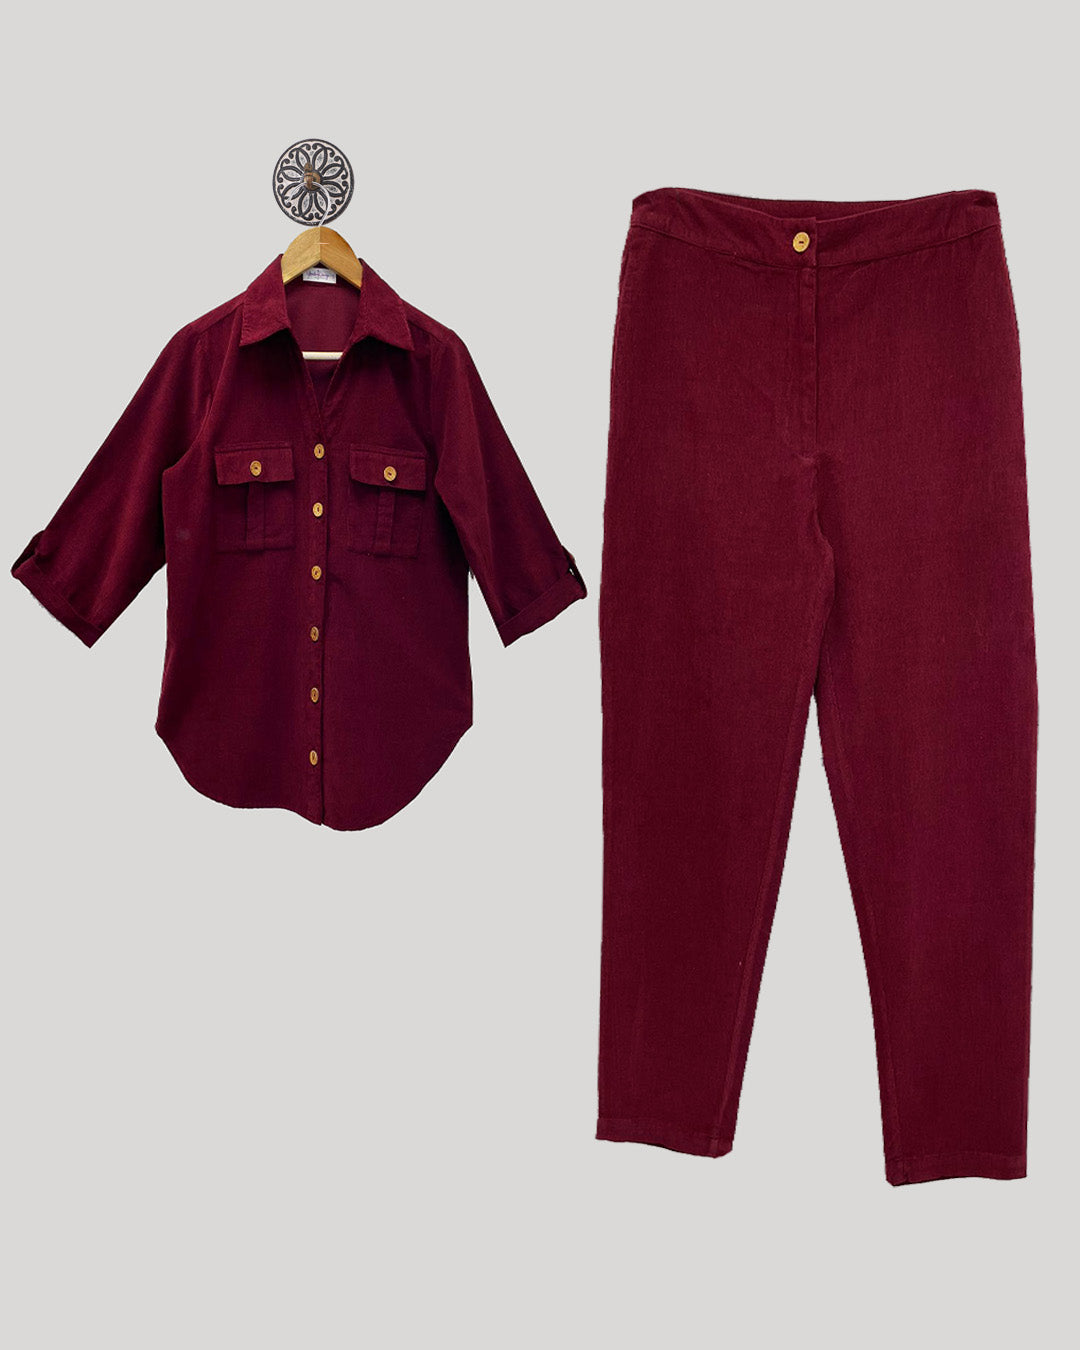 CORDUROY COORD SET WITH WOODEN BUTTONS